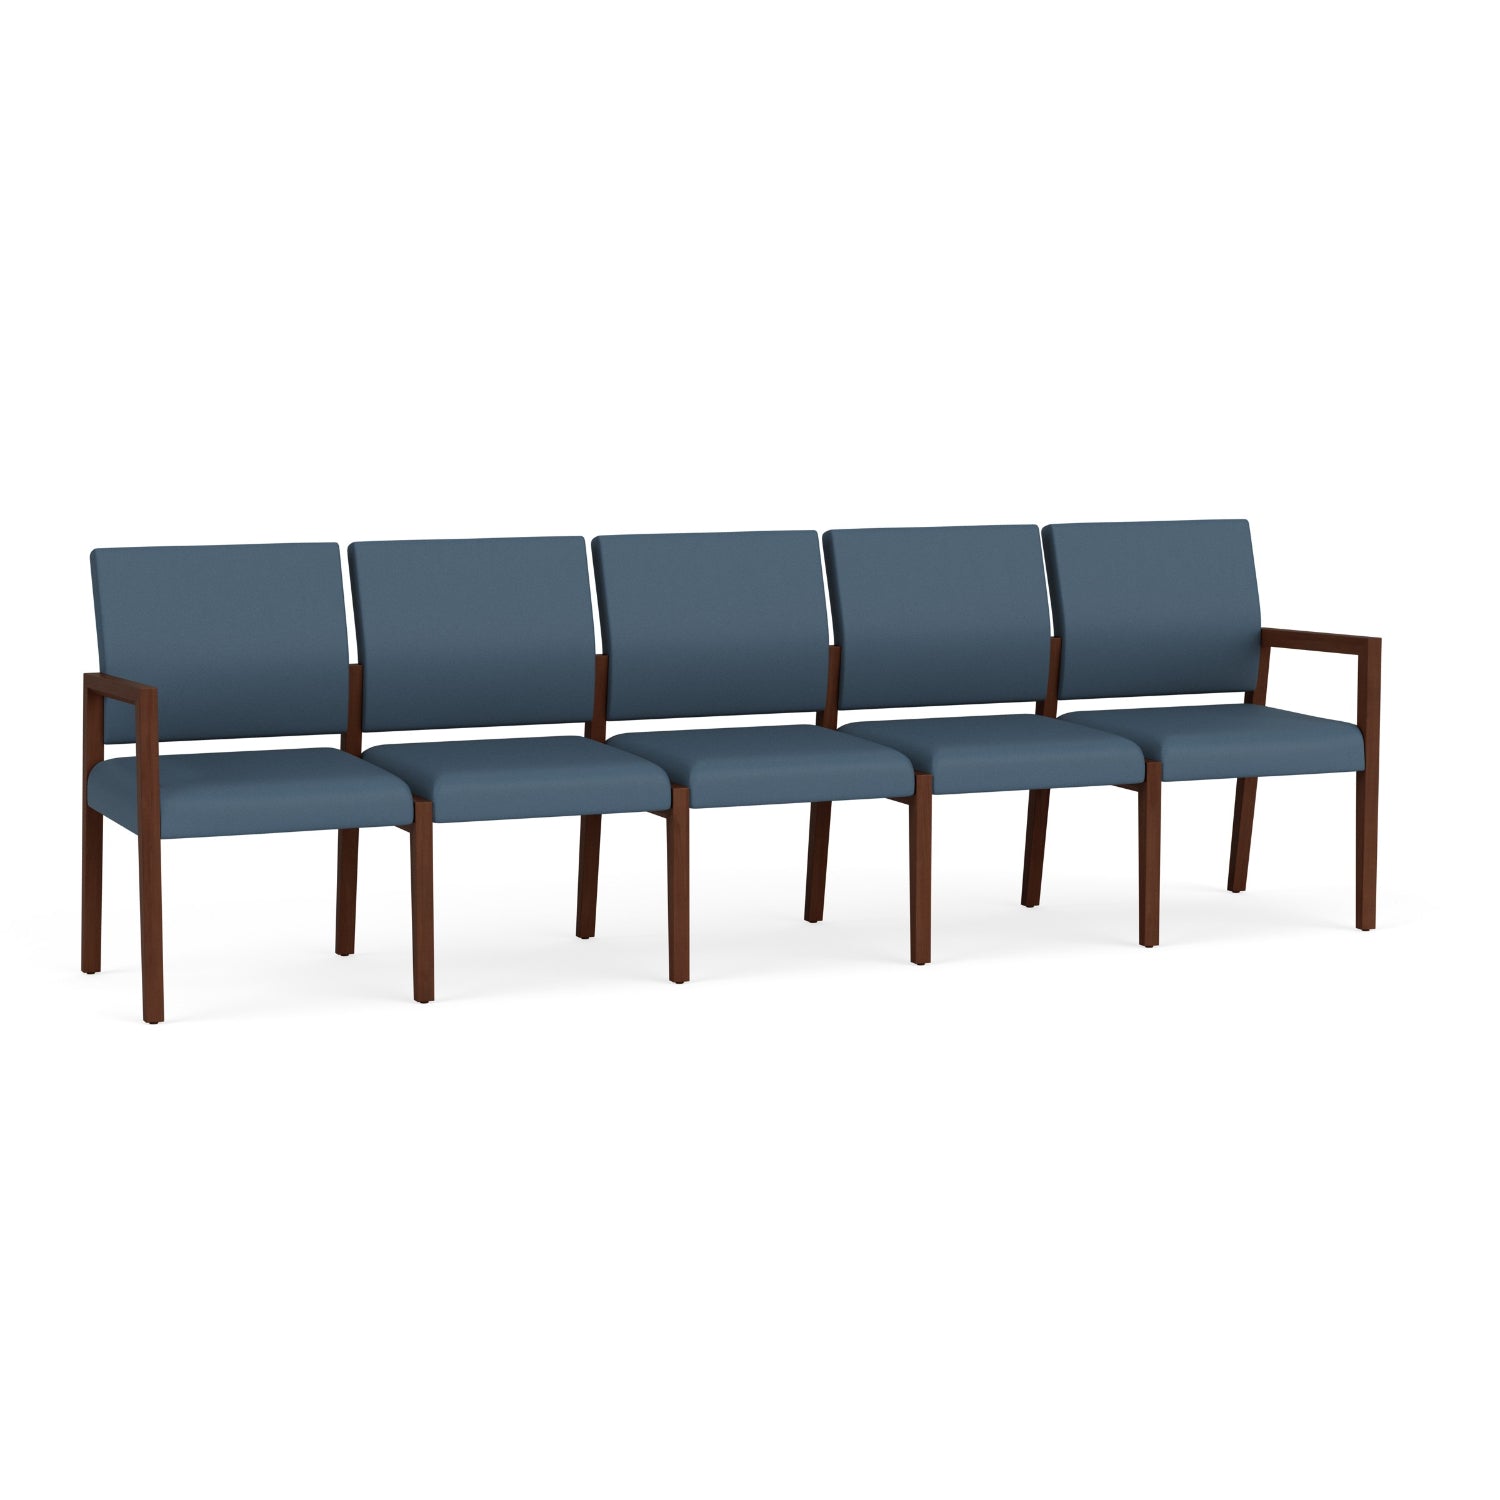 Brooklyn Collection Reception Seating, 5 Seat Sofa, Standard Vinyl Upholstery, FREE SHIPPING